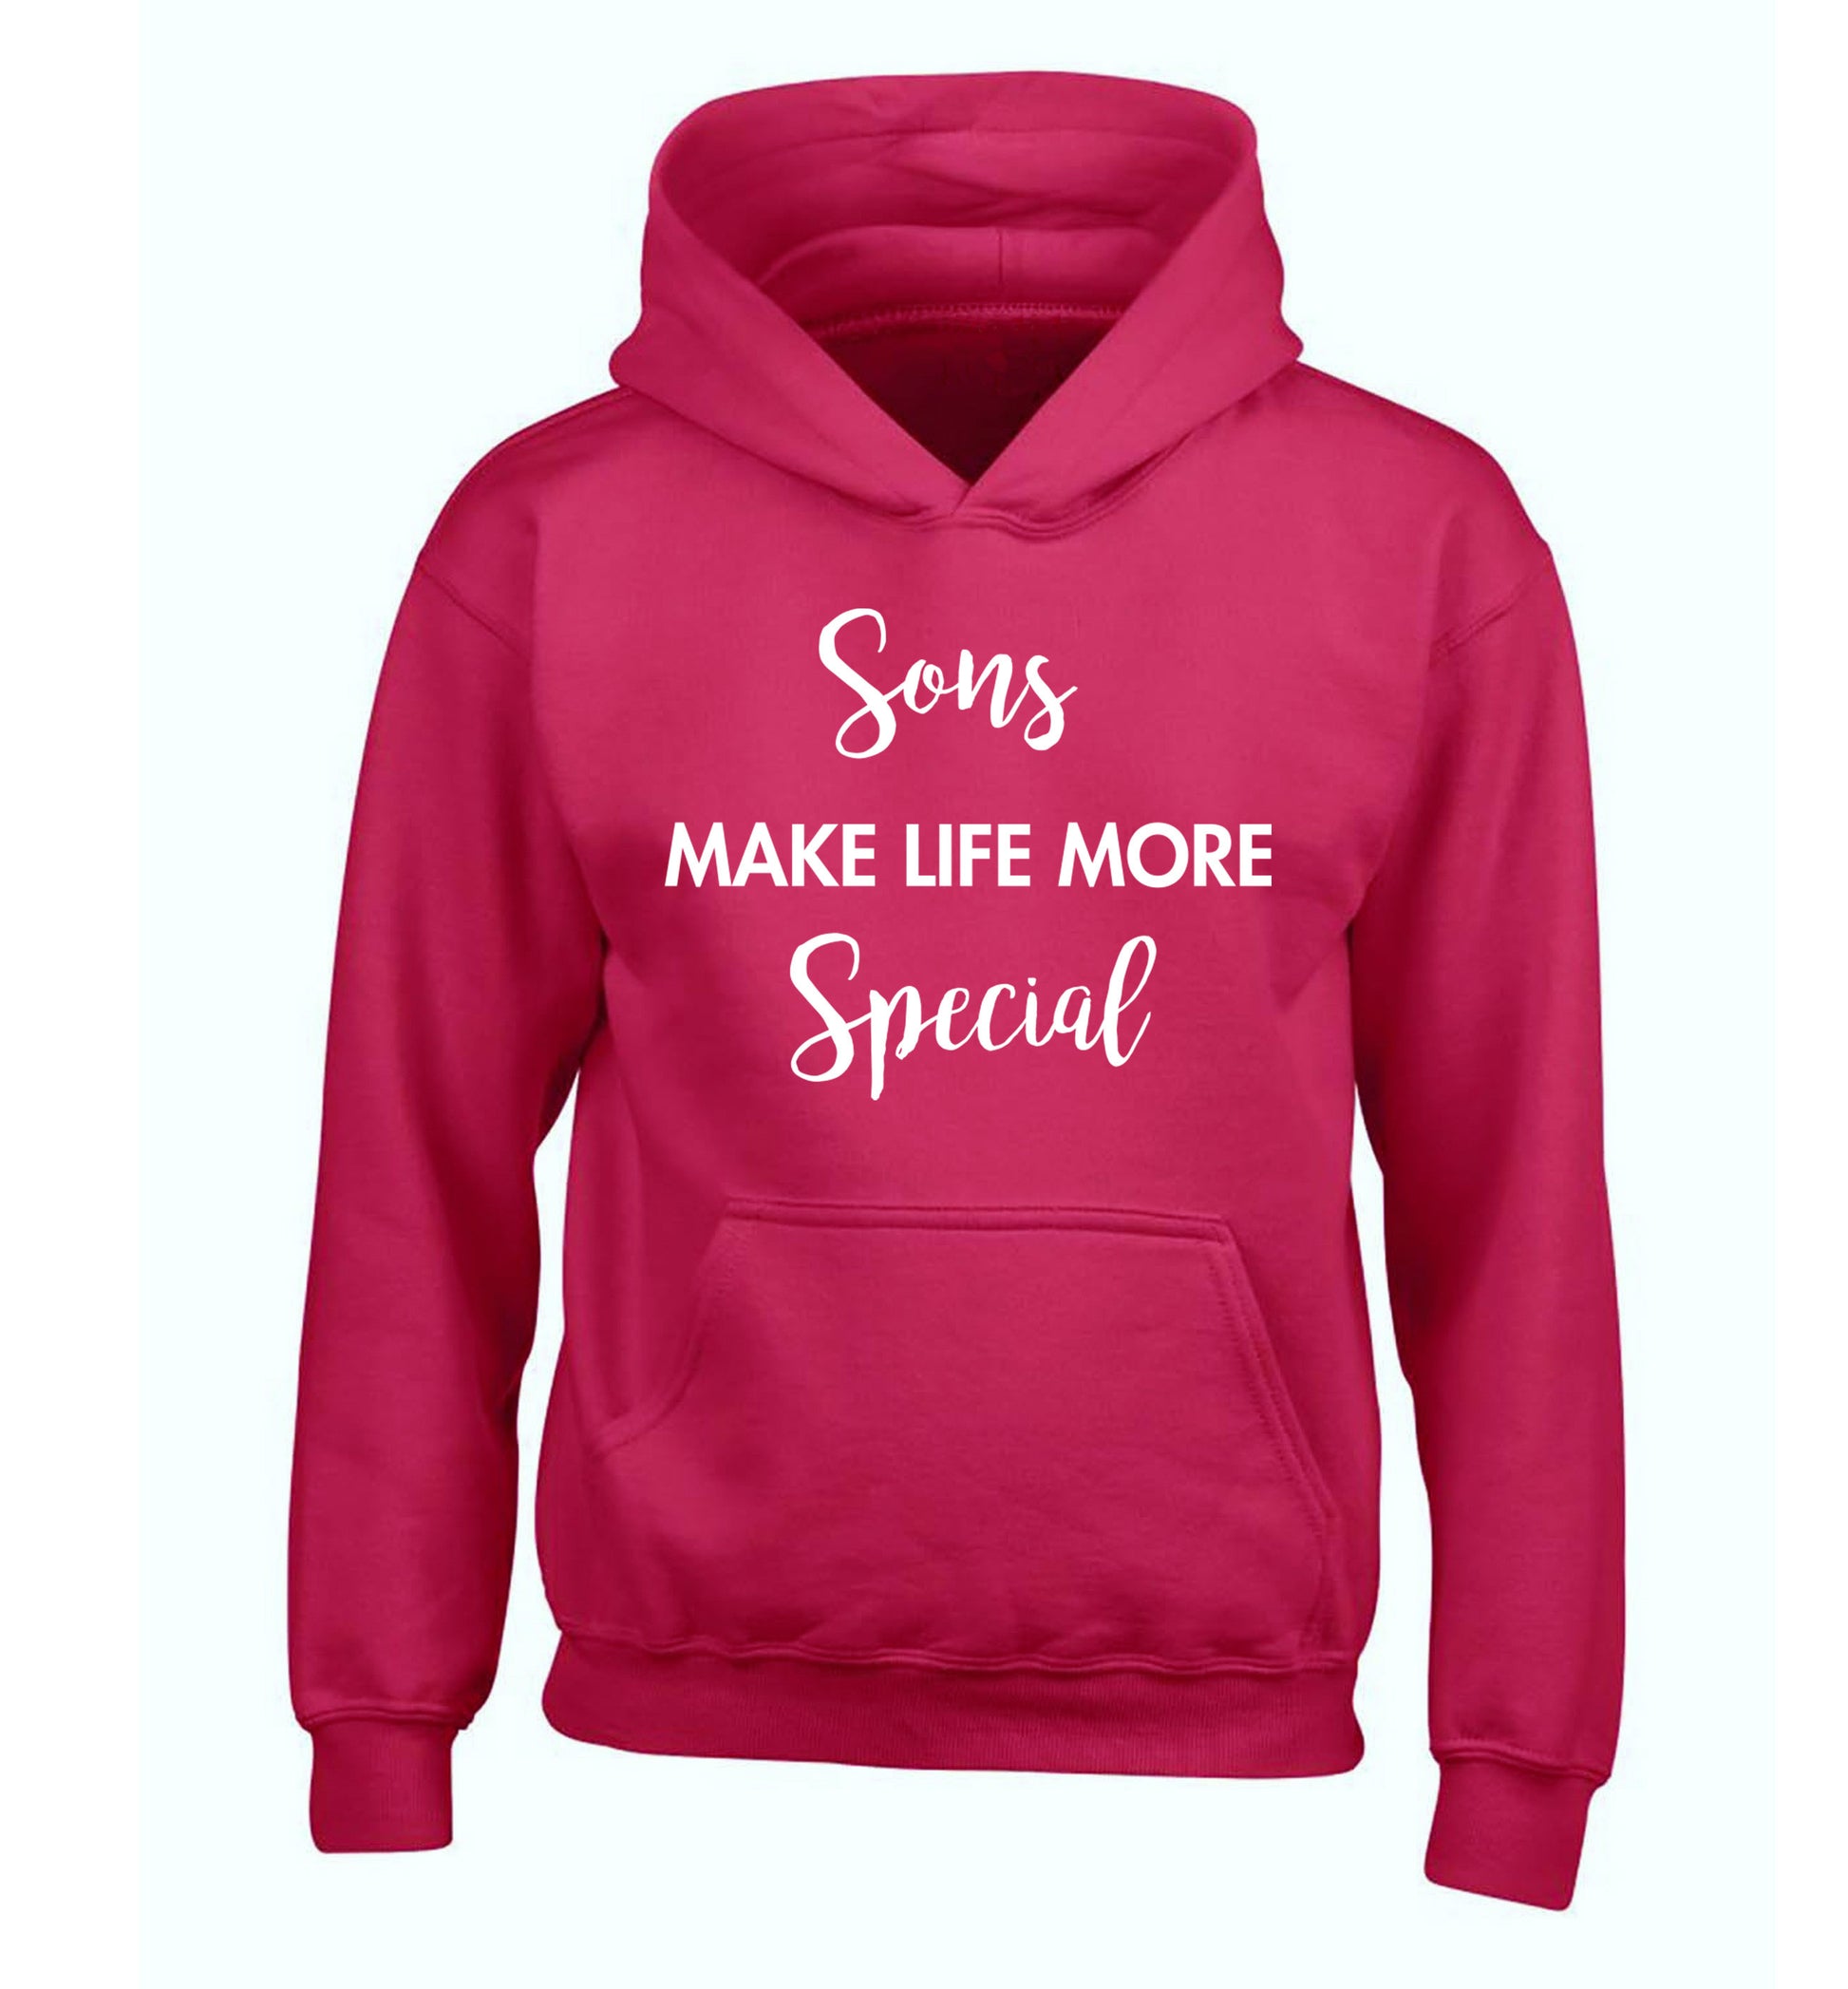 Sons make life more special children's pink hoodie 12-14 Years